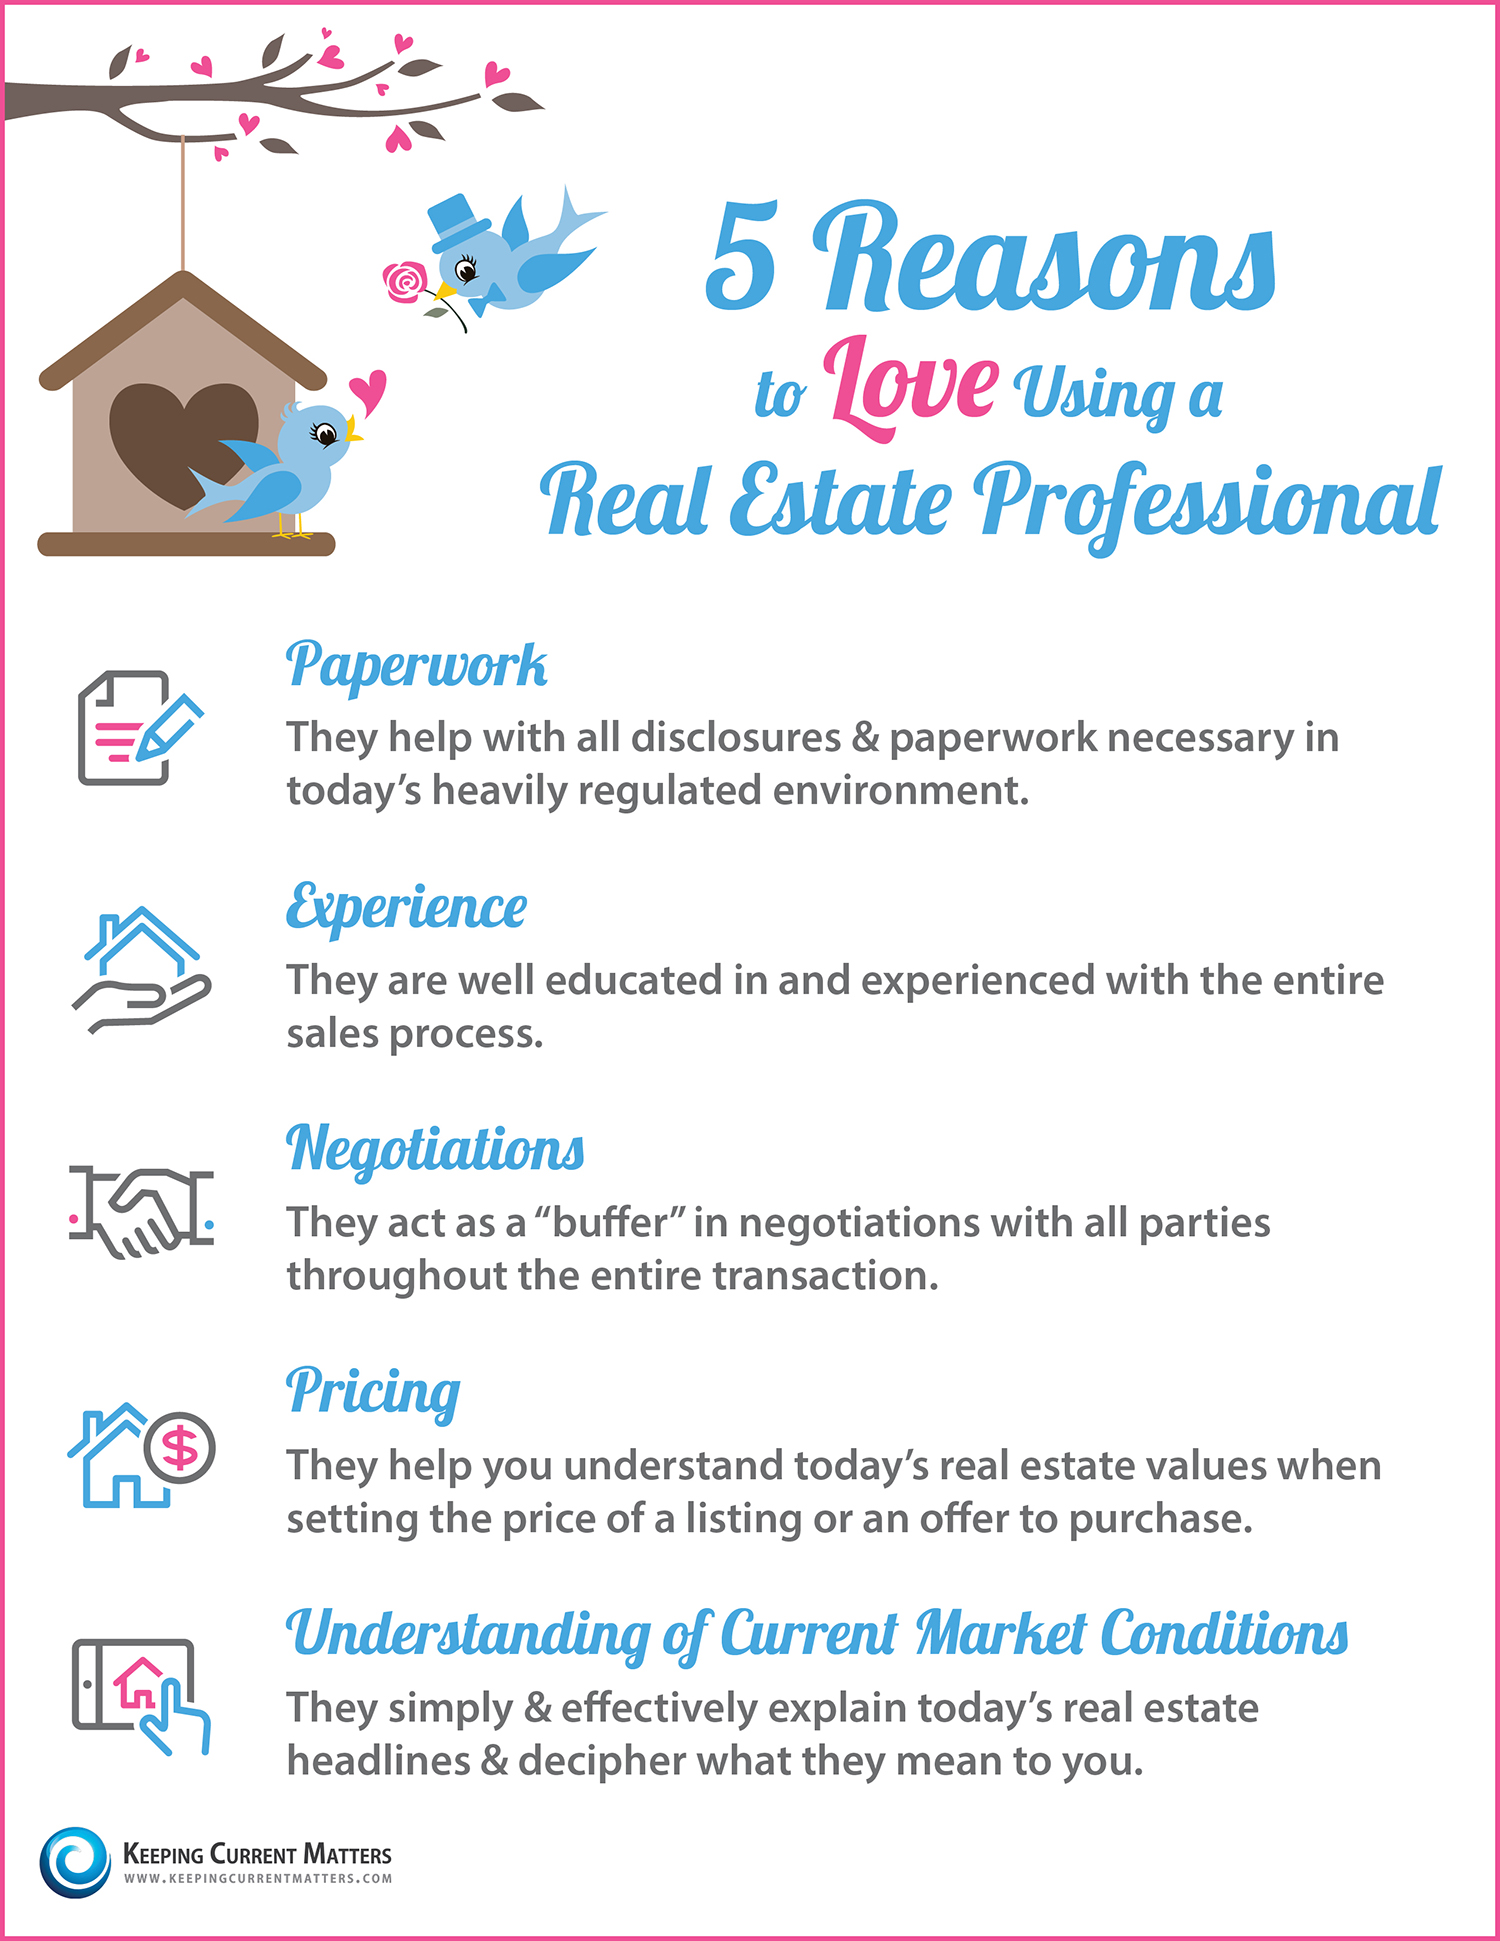 5 Reasons to Love Using a Real Estate Professional [INFOGRAPHIC] | Keeping Current Matters